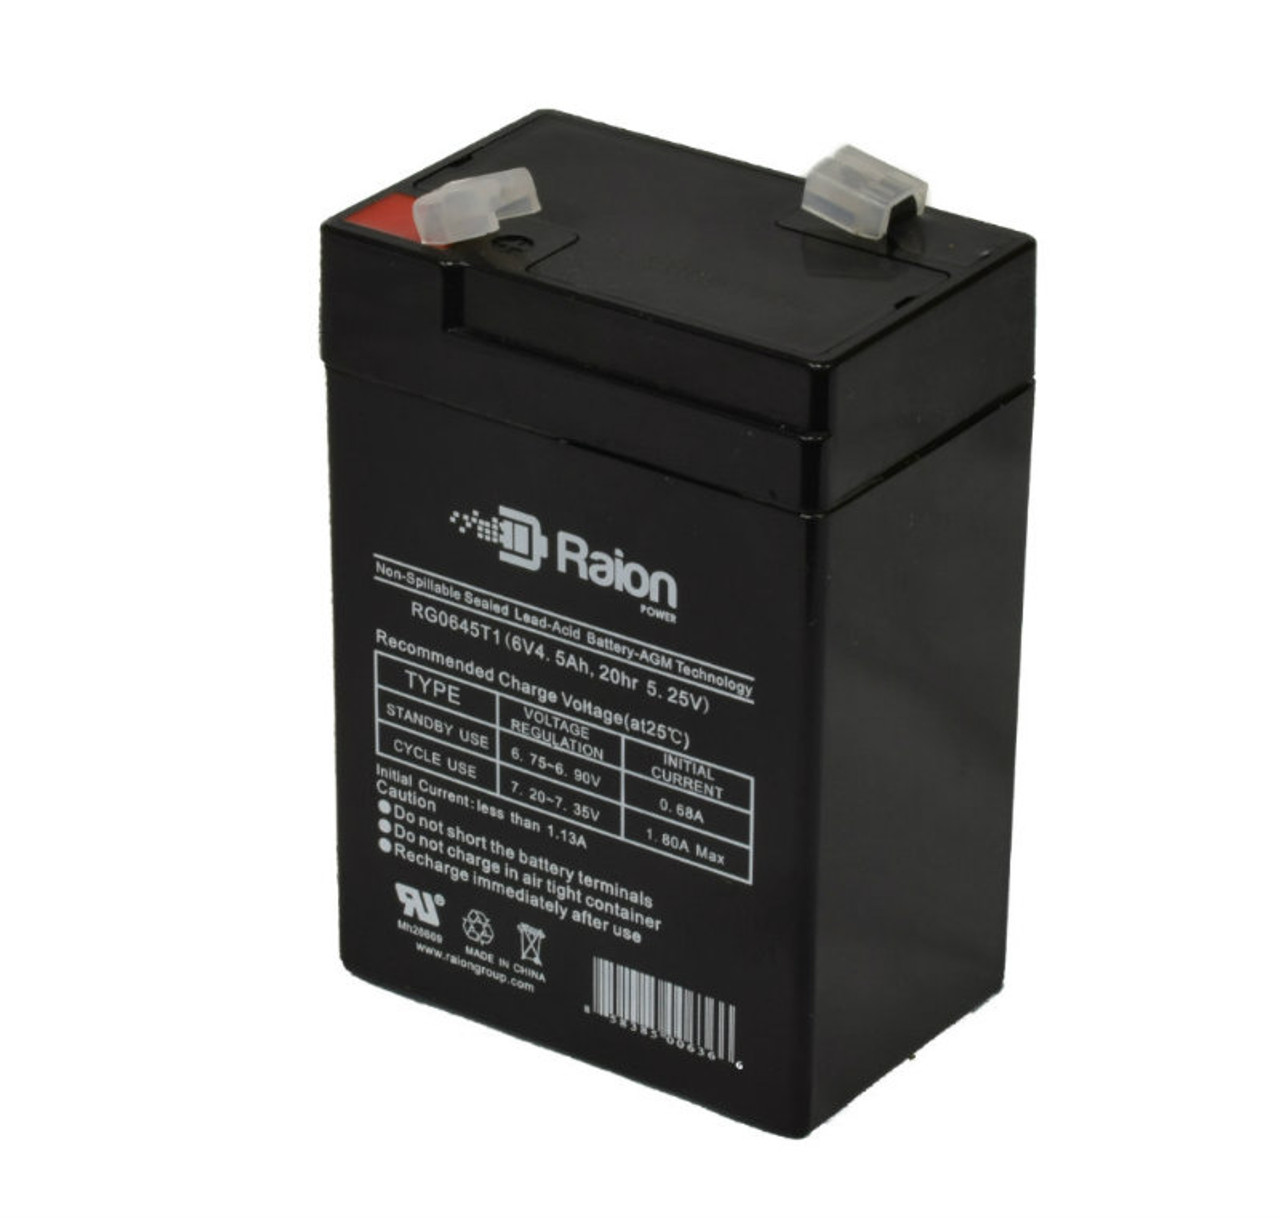 Raion Power RG0645T1 6V 4.5Ah Replacement Battery Cartridge for Chloride E88